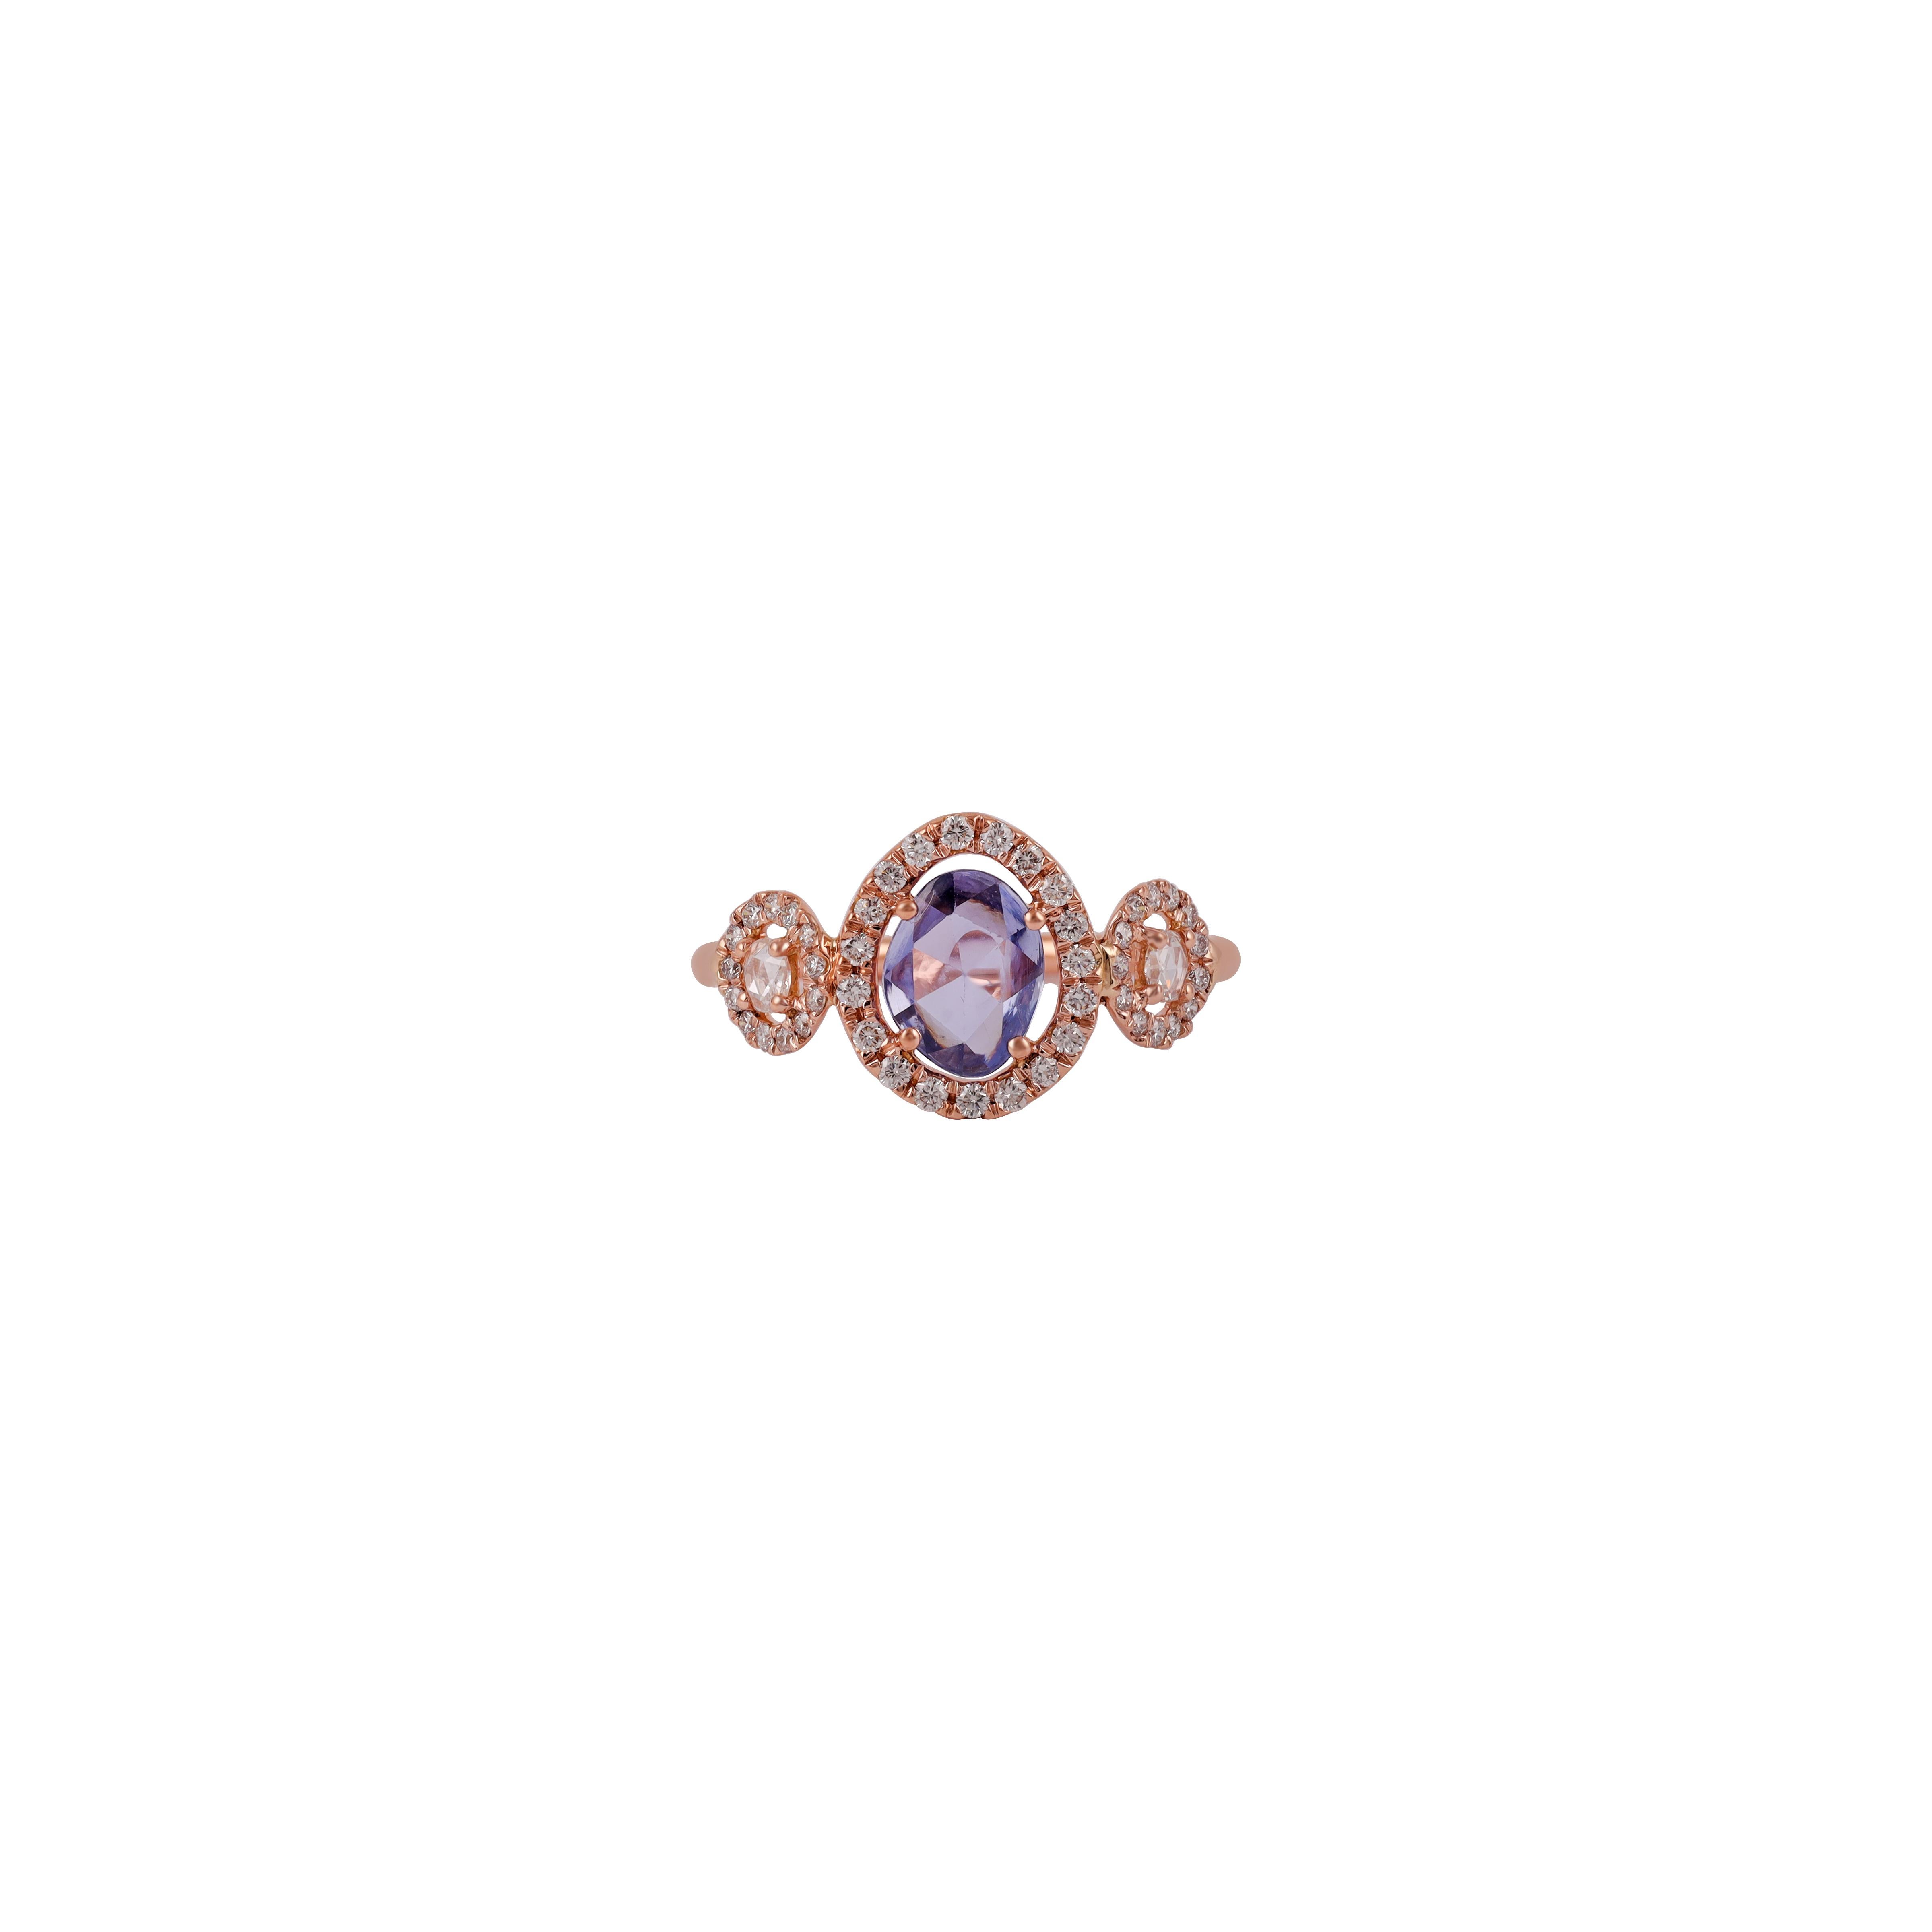 Blue Sapphire surrounded by brilliant round cut Diamond Ring 
1 Uneven shape Sapphire 0.90 CTS
 Both side 2  Rose cut  Diamonds 0.10 CTS
45 Round brilliant cut diamonds 0.29 CTS
18 k Rose gold mounting 2.13 GMS


Custom Services
Resizing is